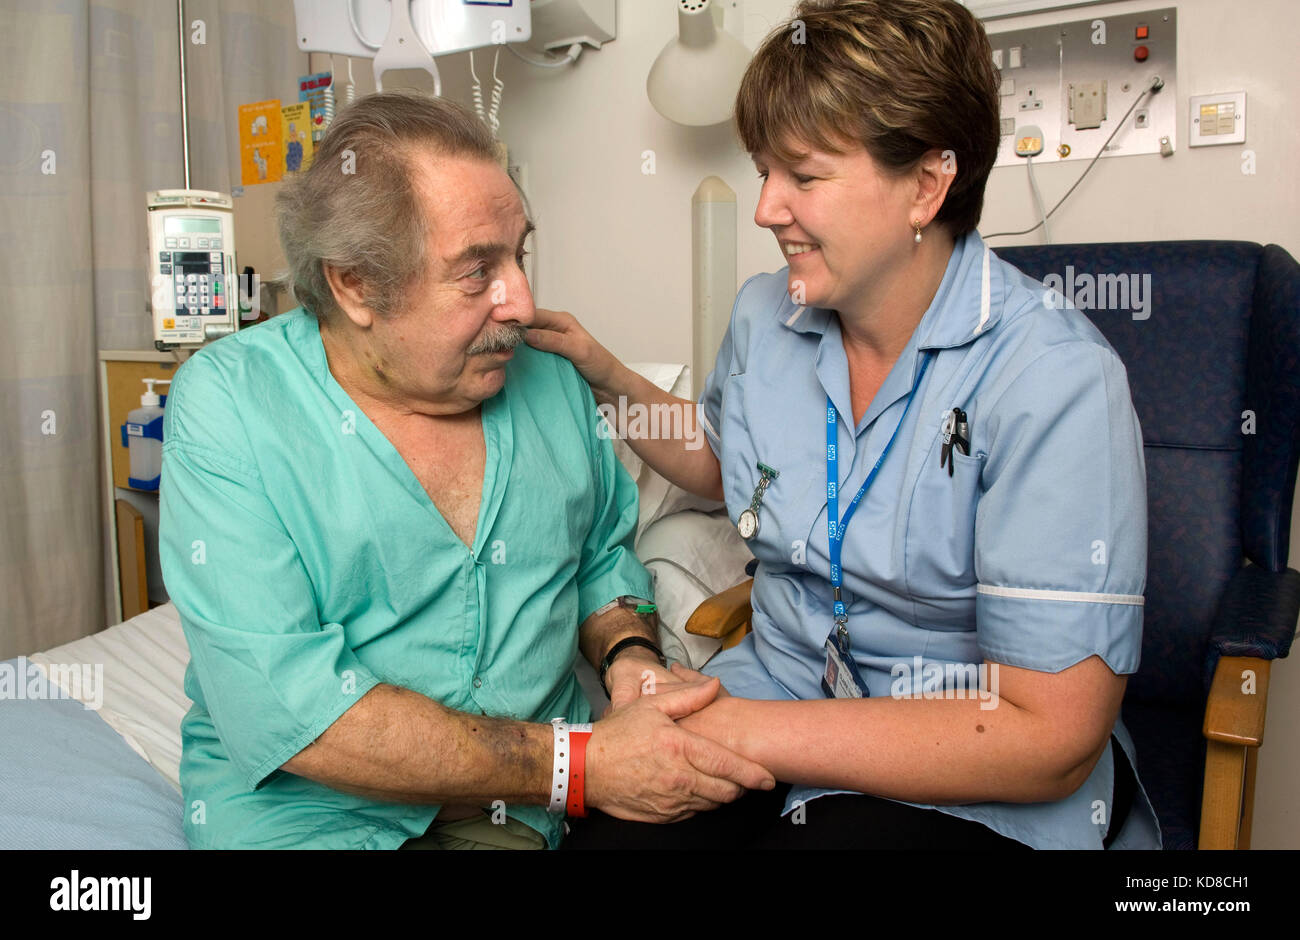 Claire Thomas with Bill Hardingham, who she assisted when he collapsed outside her home, together in the Royal United Hospital, Bath. Stock Photo